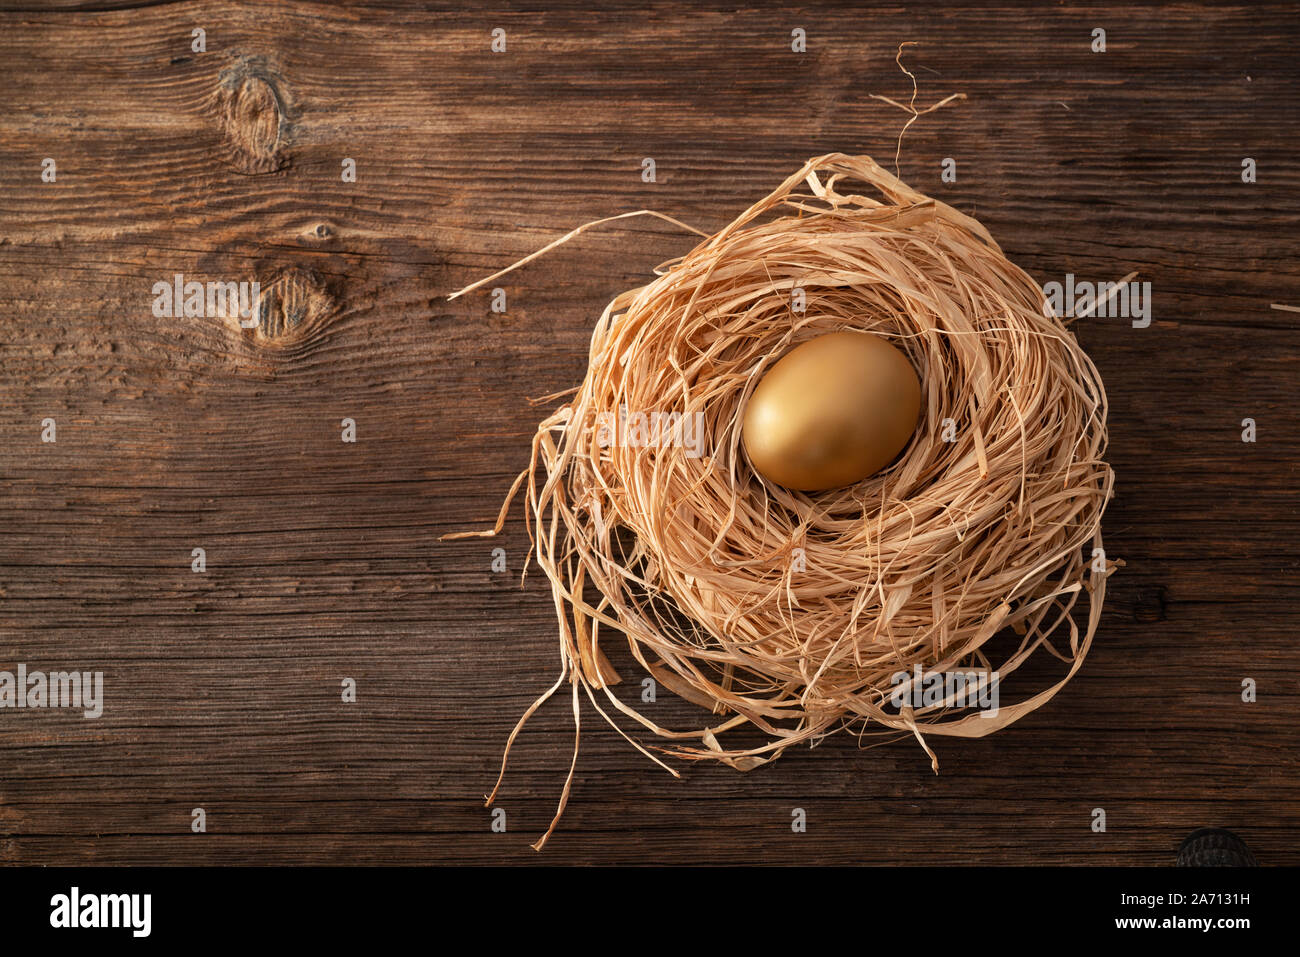 Unique and valuable golden egg with nest on wooden background Stock Photo